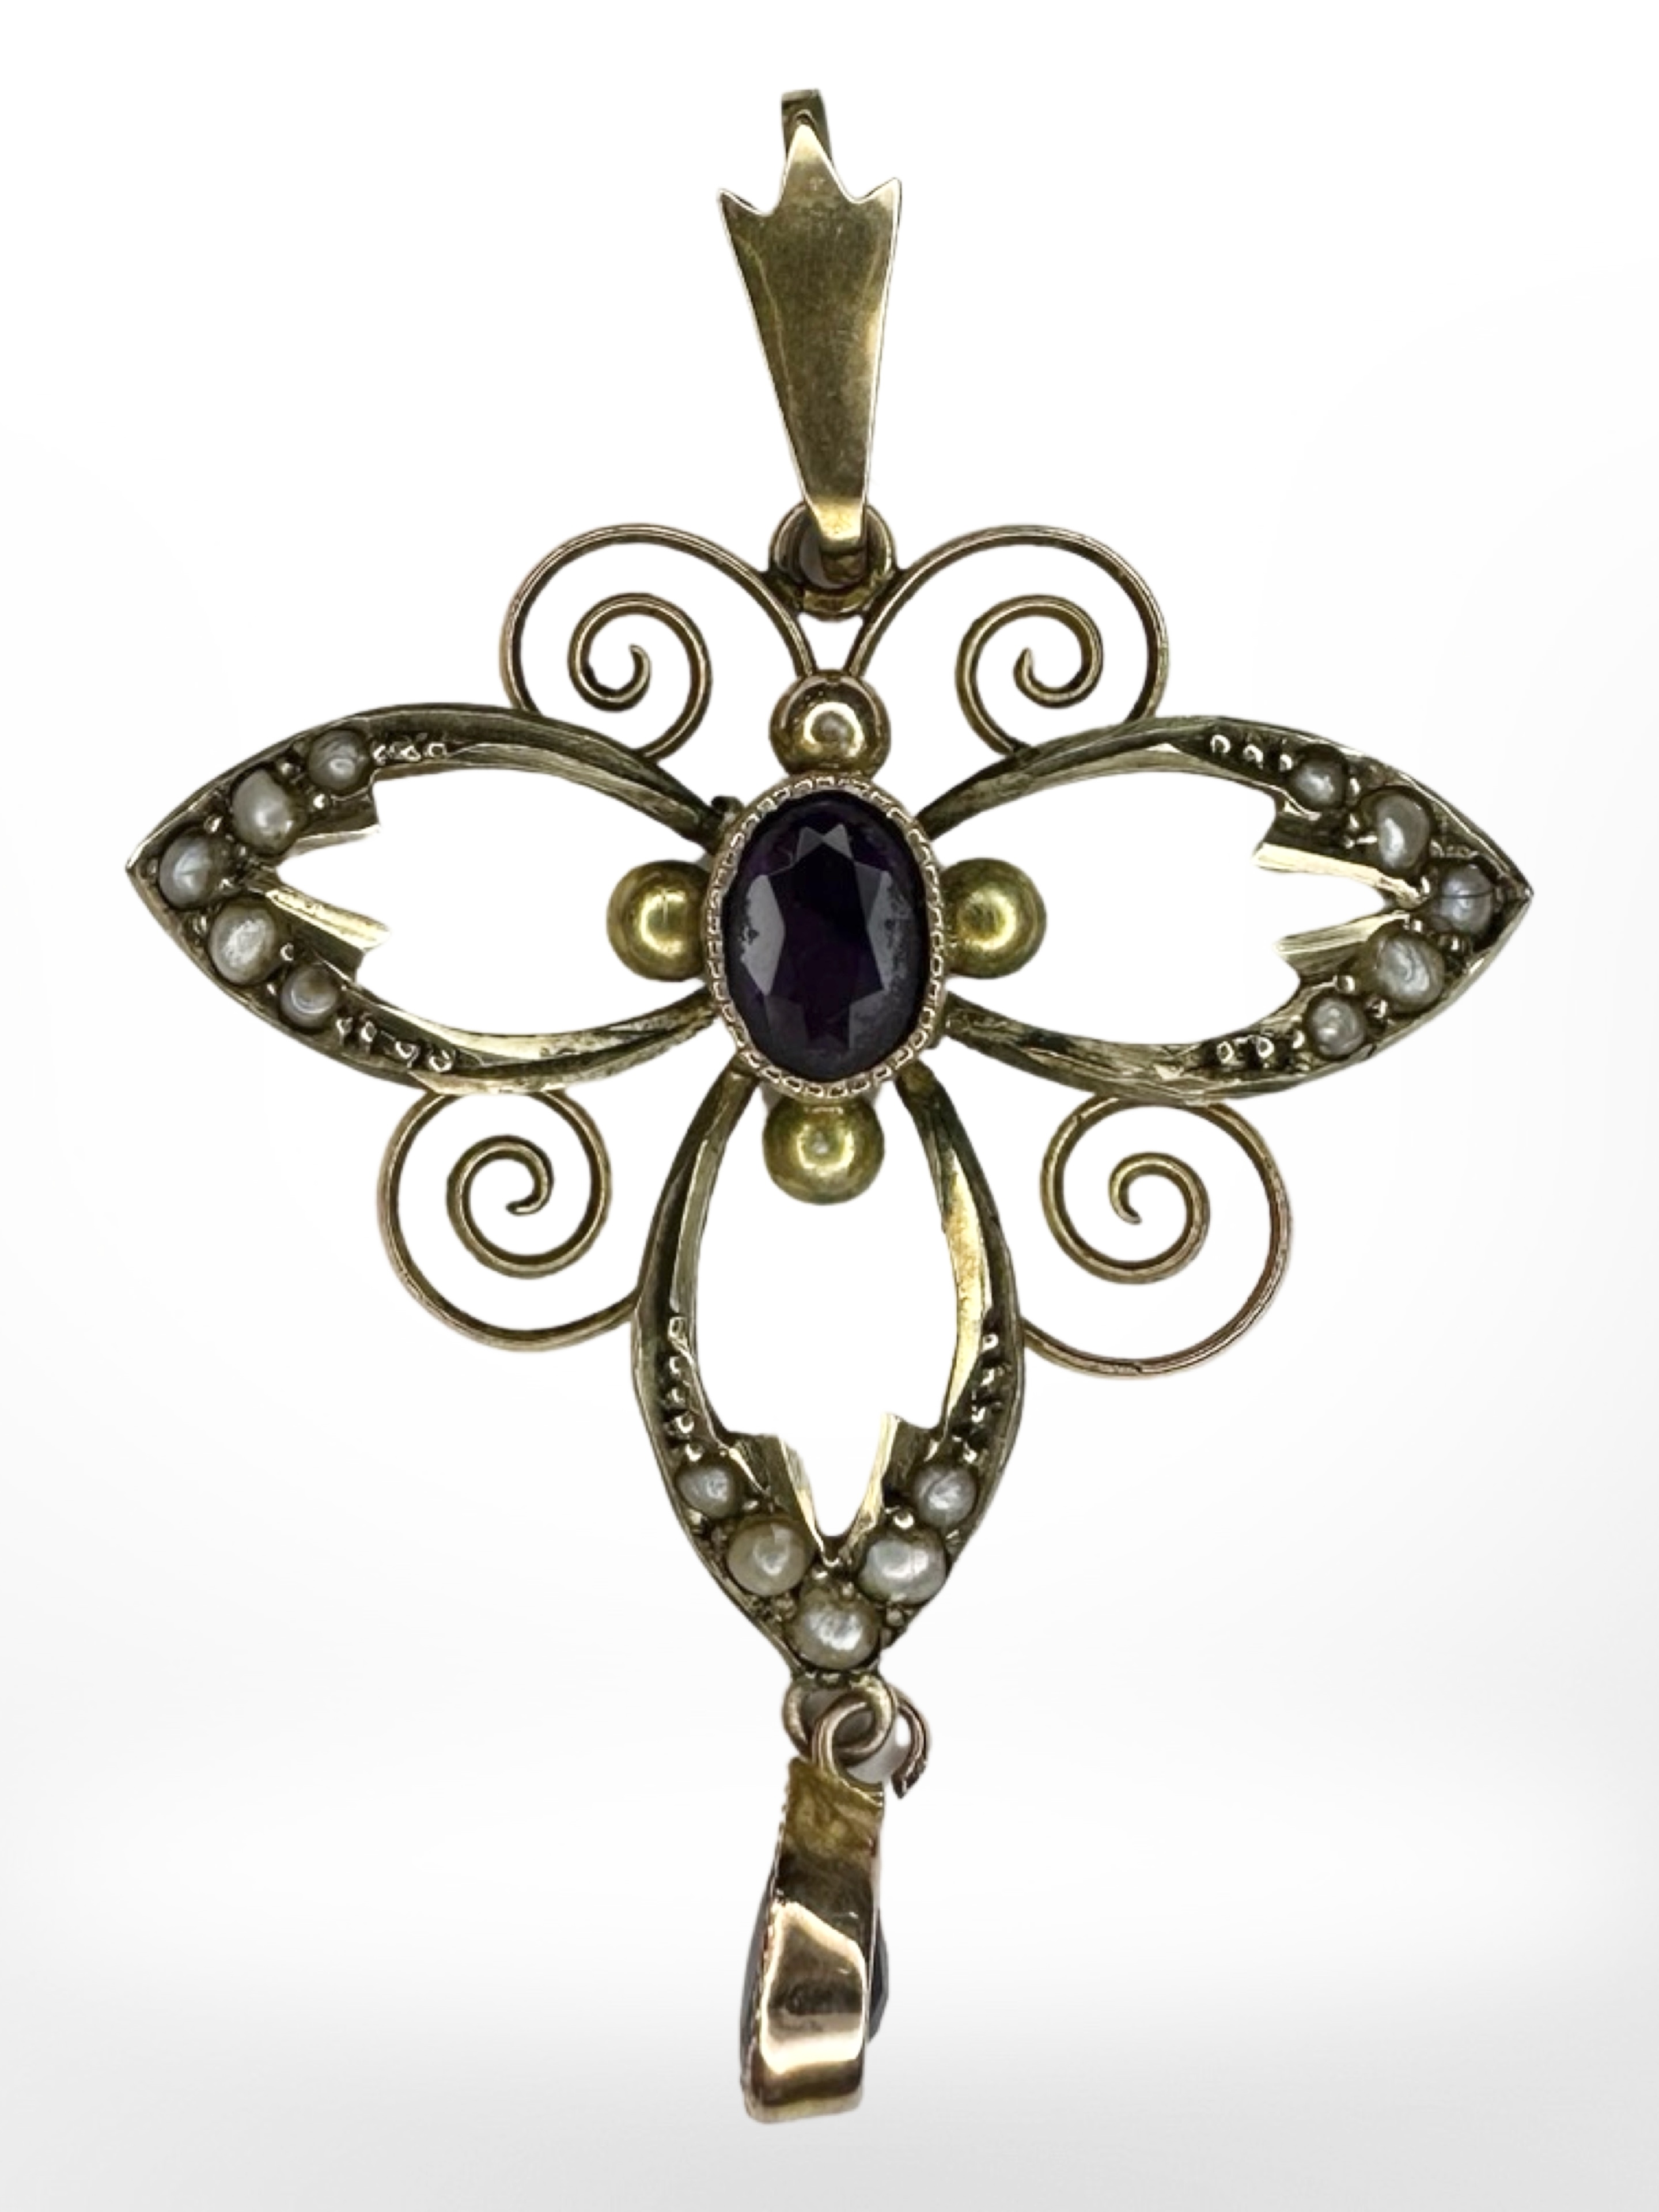 An Edwardian 9ct yellow gold seed pearl and amethyst pendant, length including bale 41 mm.